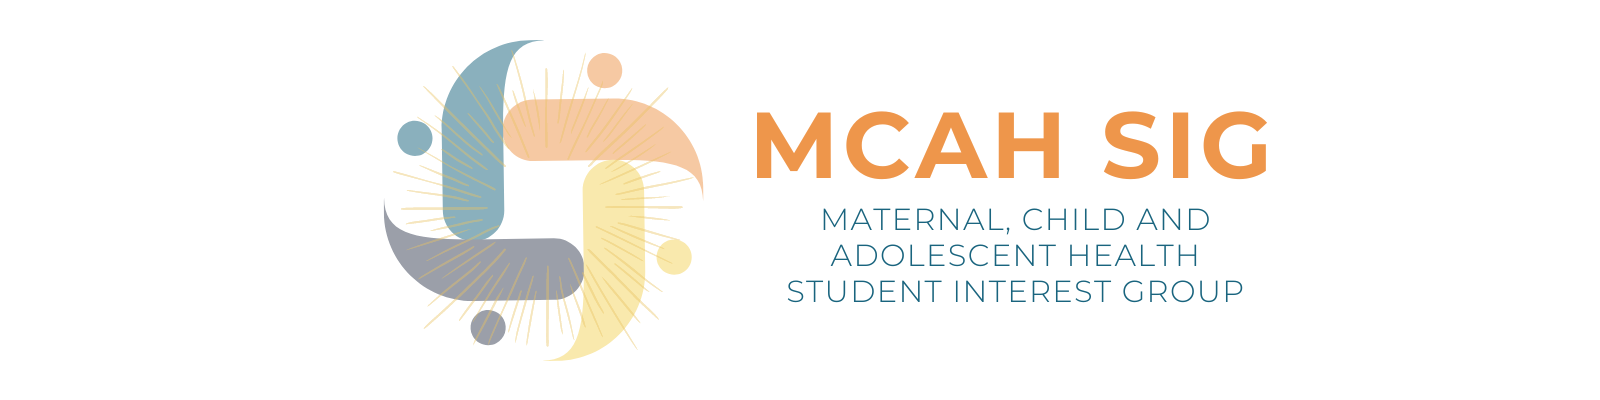  Maternal, Child, and Adolescent Health Student Interest Group. Logo.